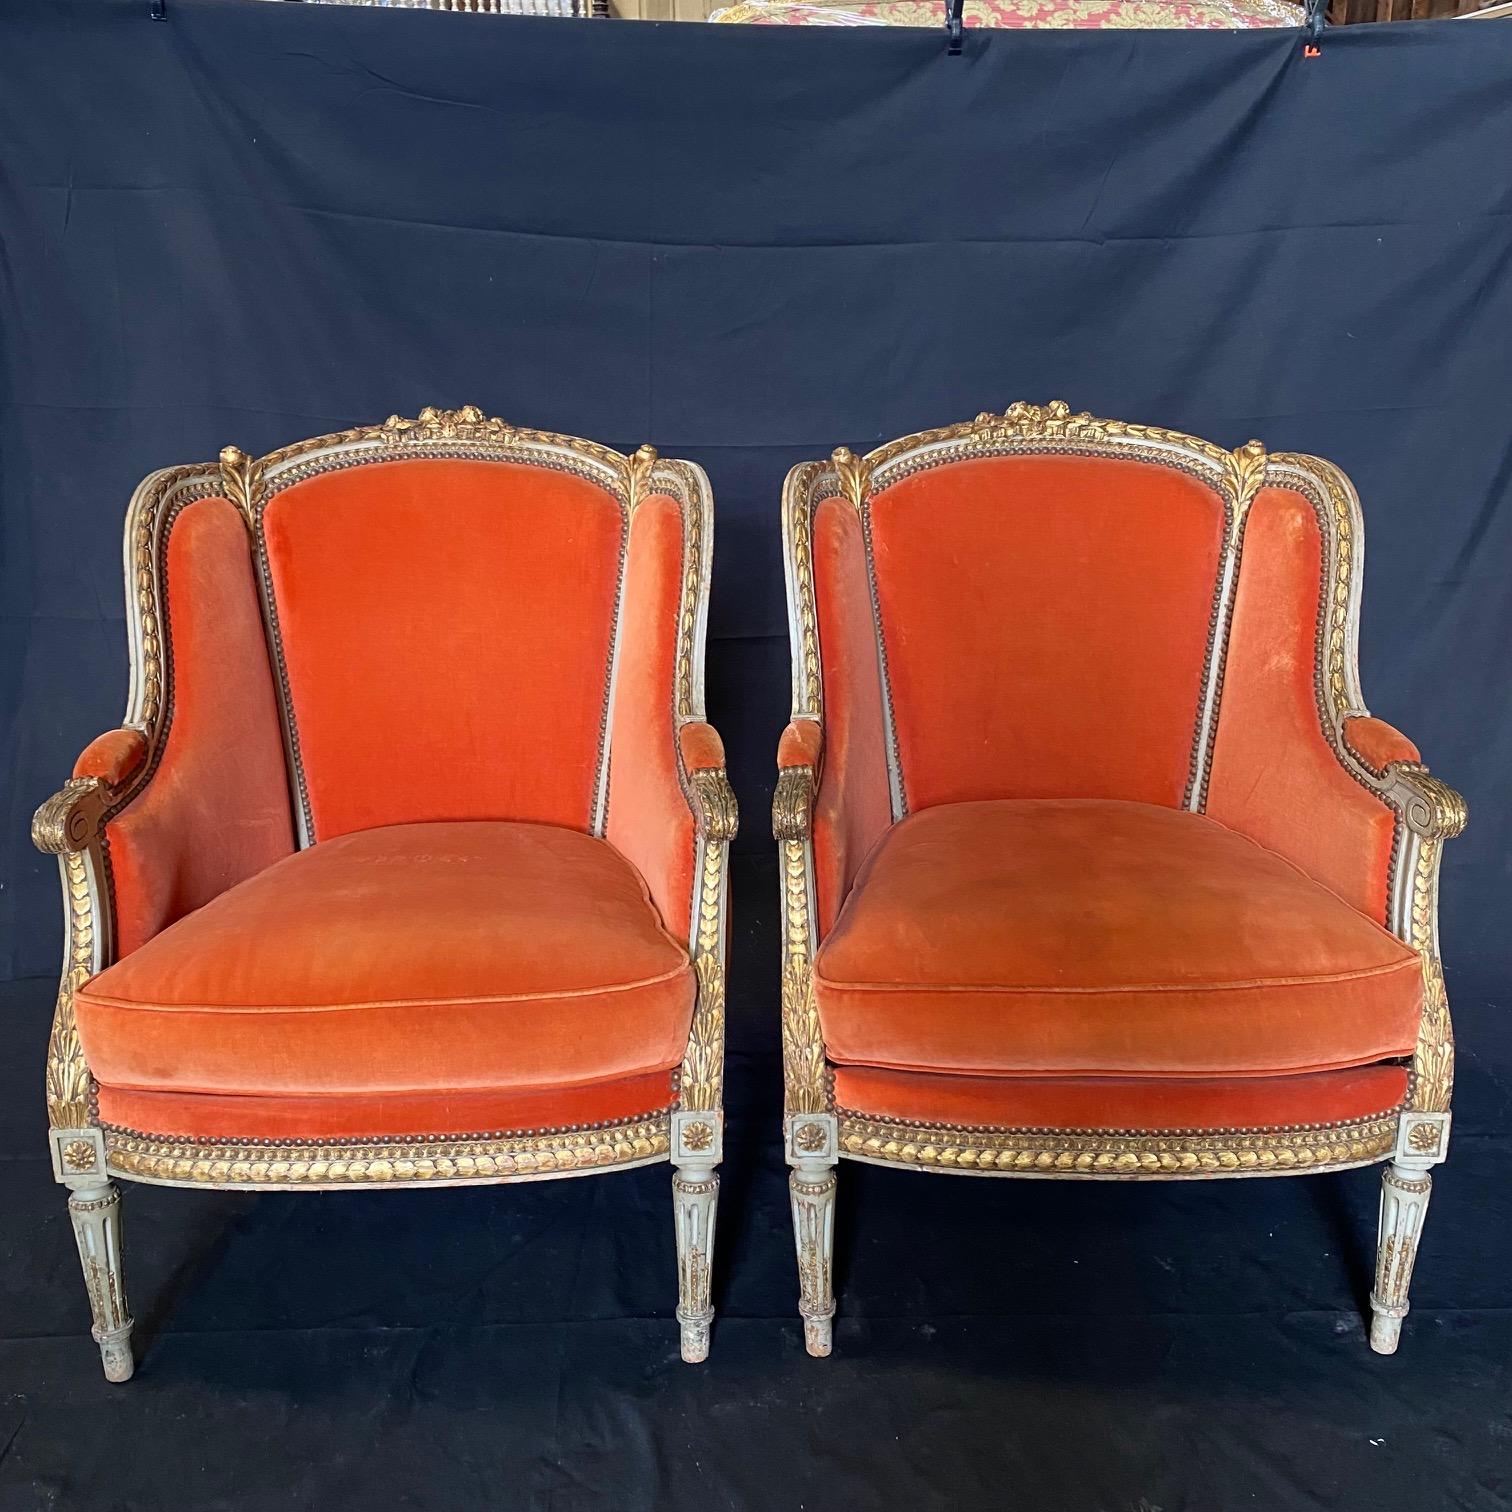 A stunning pair of antique, late 19th century French upholstered carved and gilt armchairs or wing chairs. The chairs feature carved and gilded floral swags around the back, running coin ornament along the base, carved and decorated legs and arms.